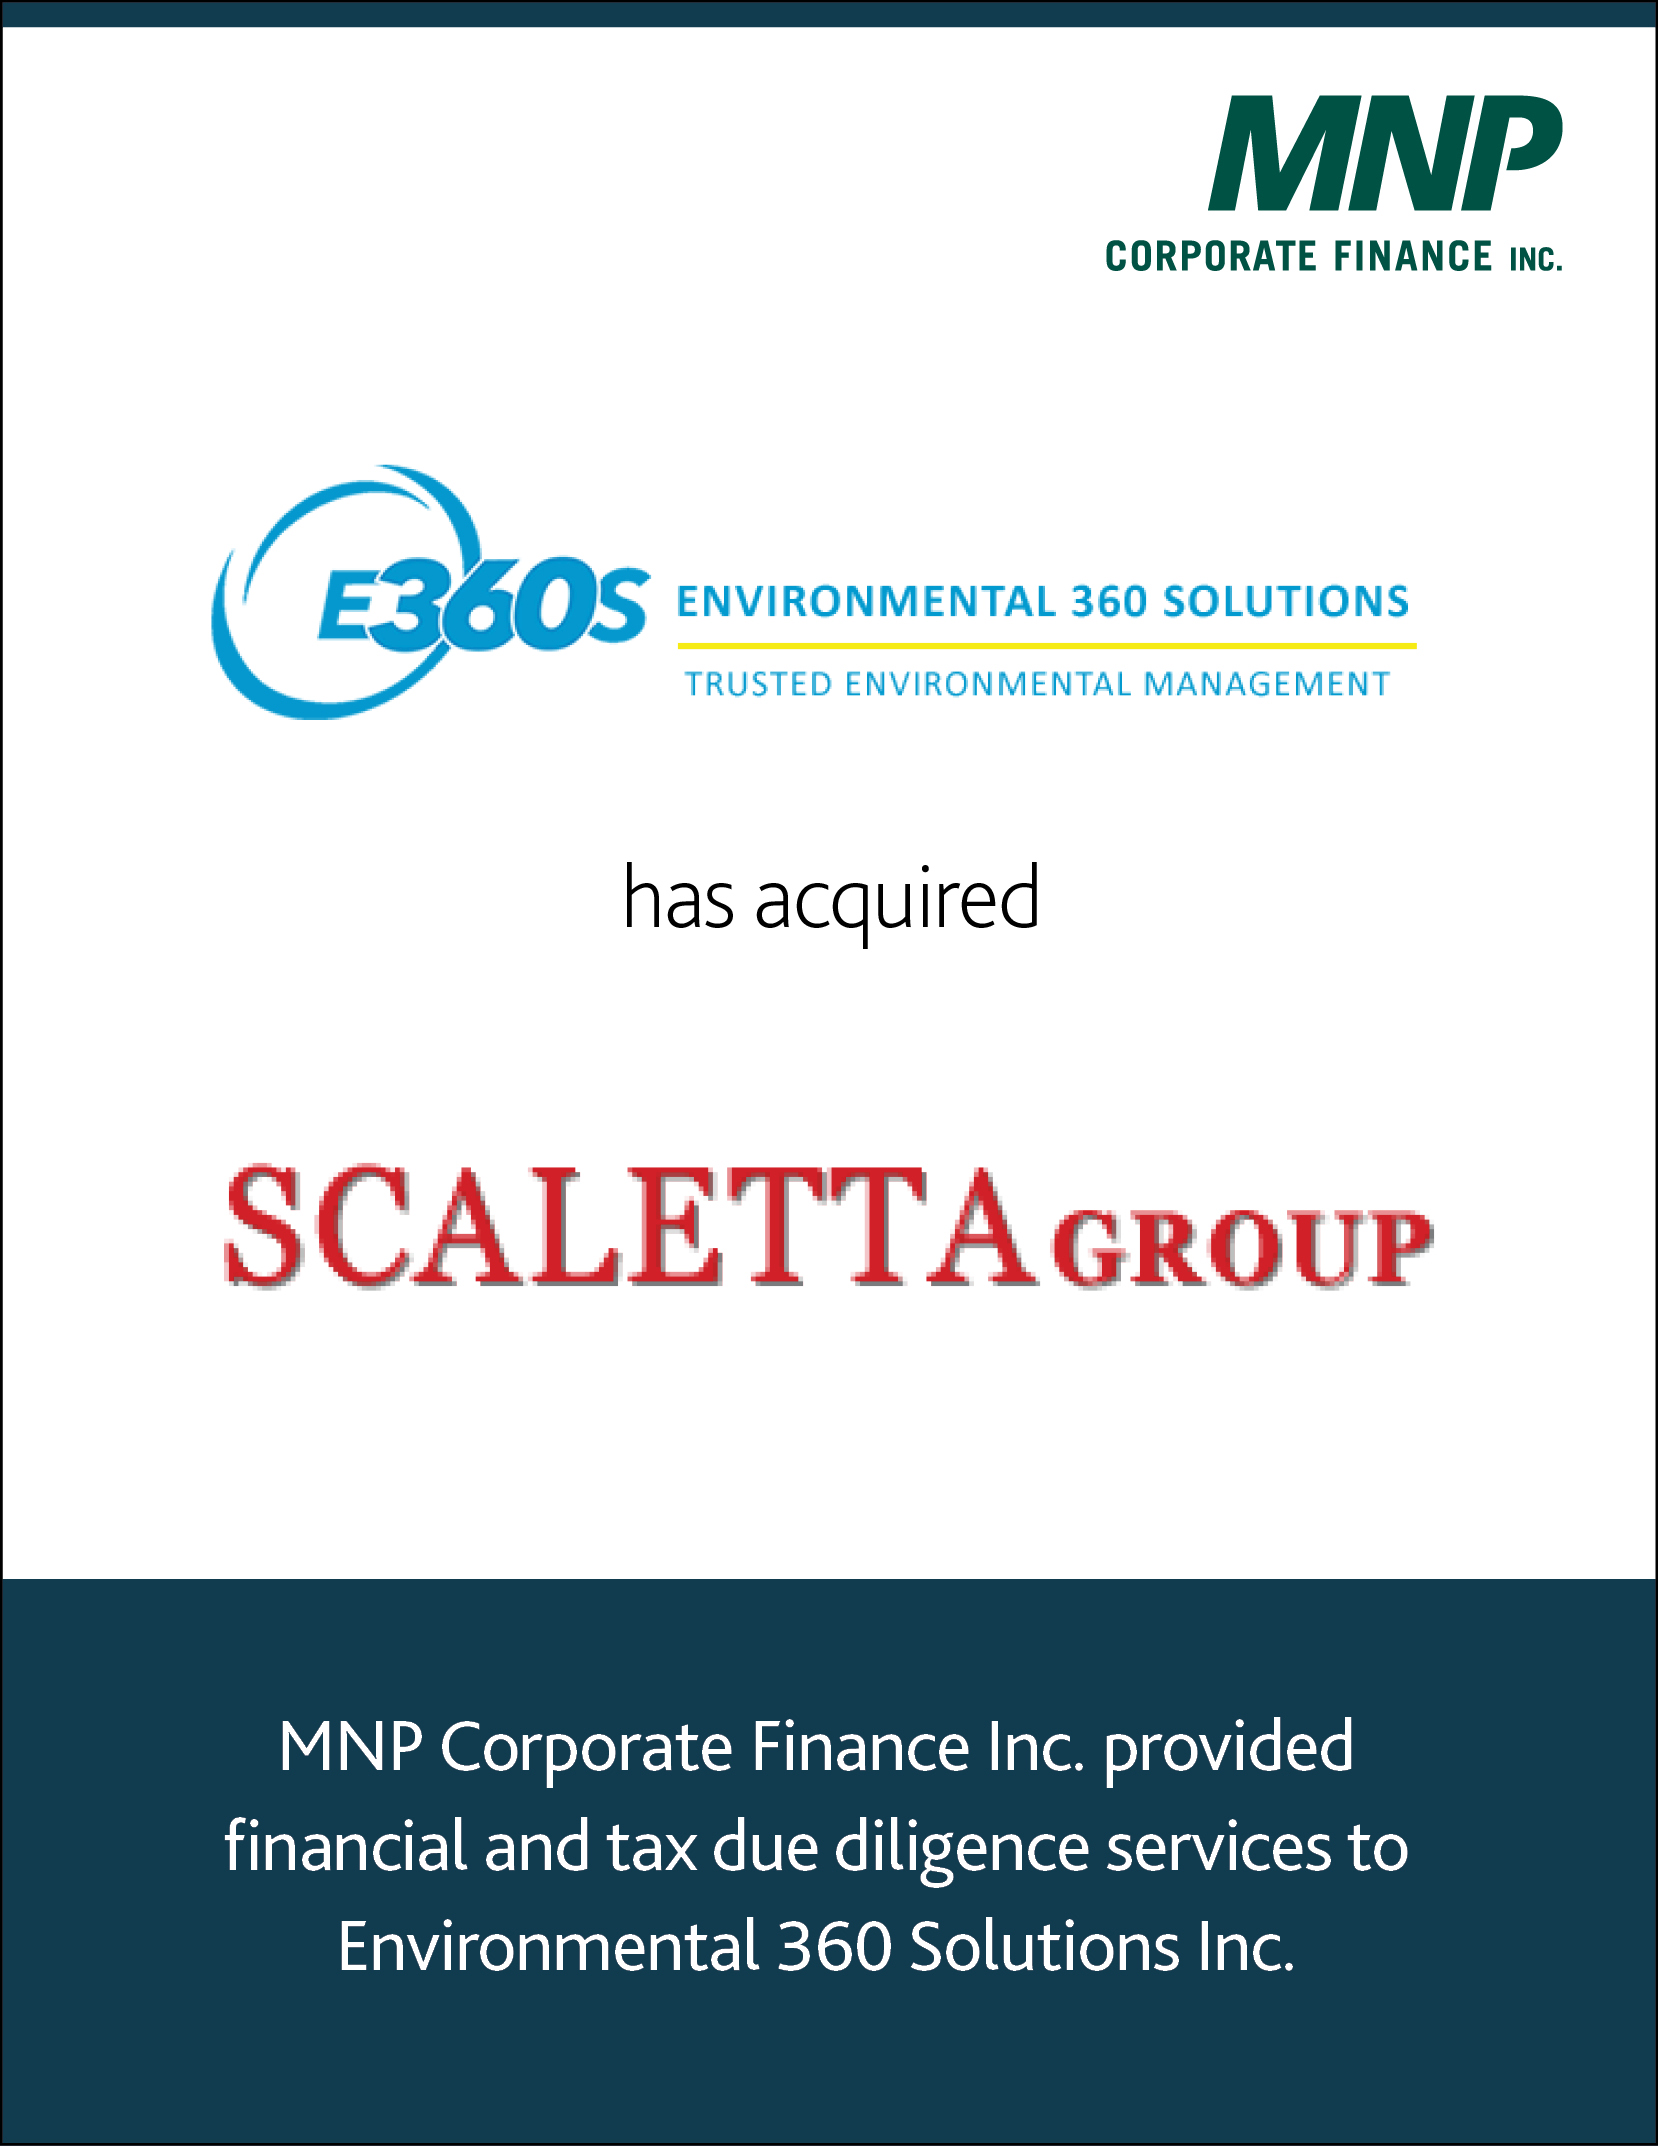 Environmental 360 Solutions has acquired Scaletta Group